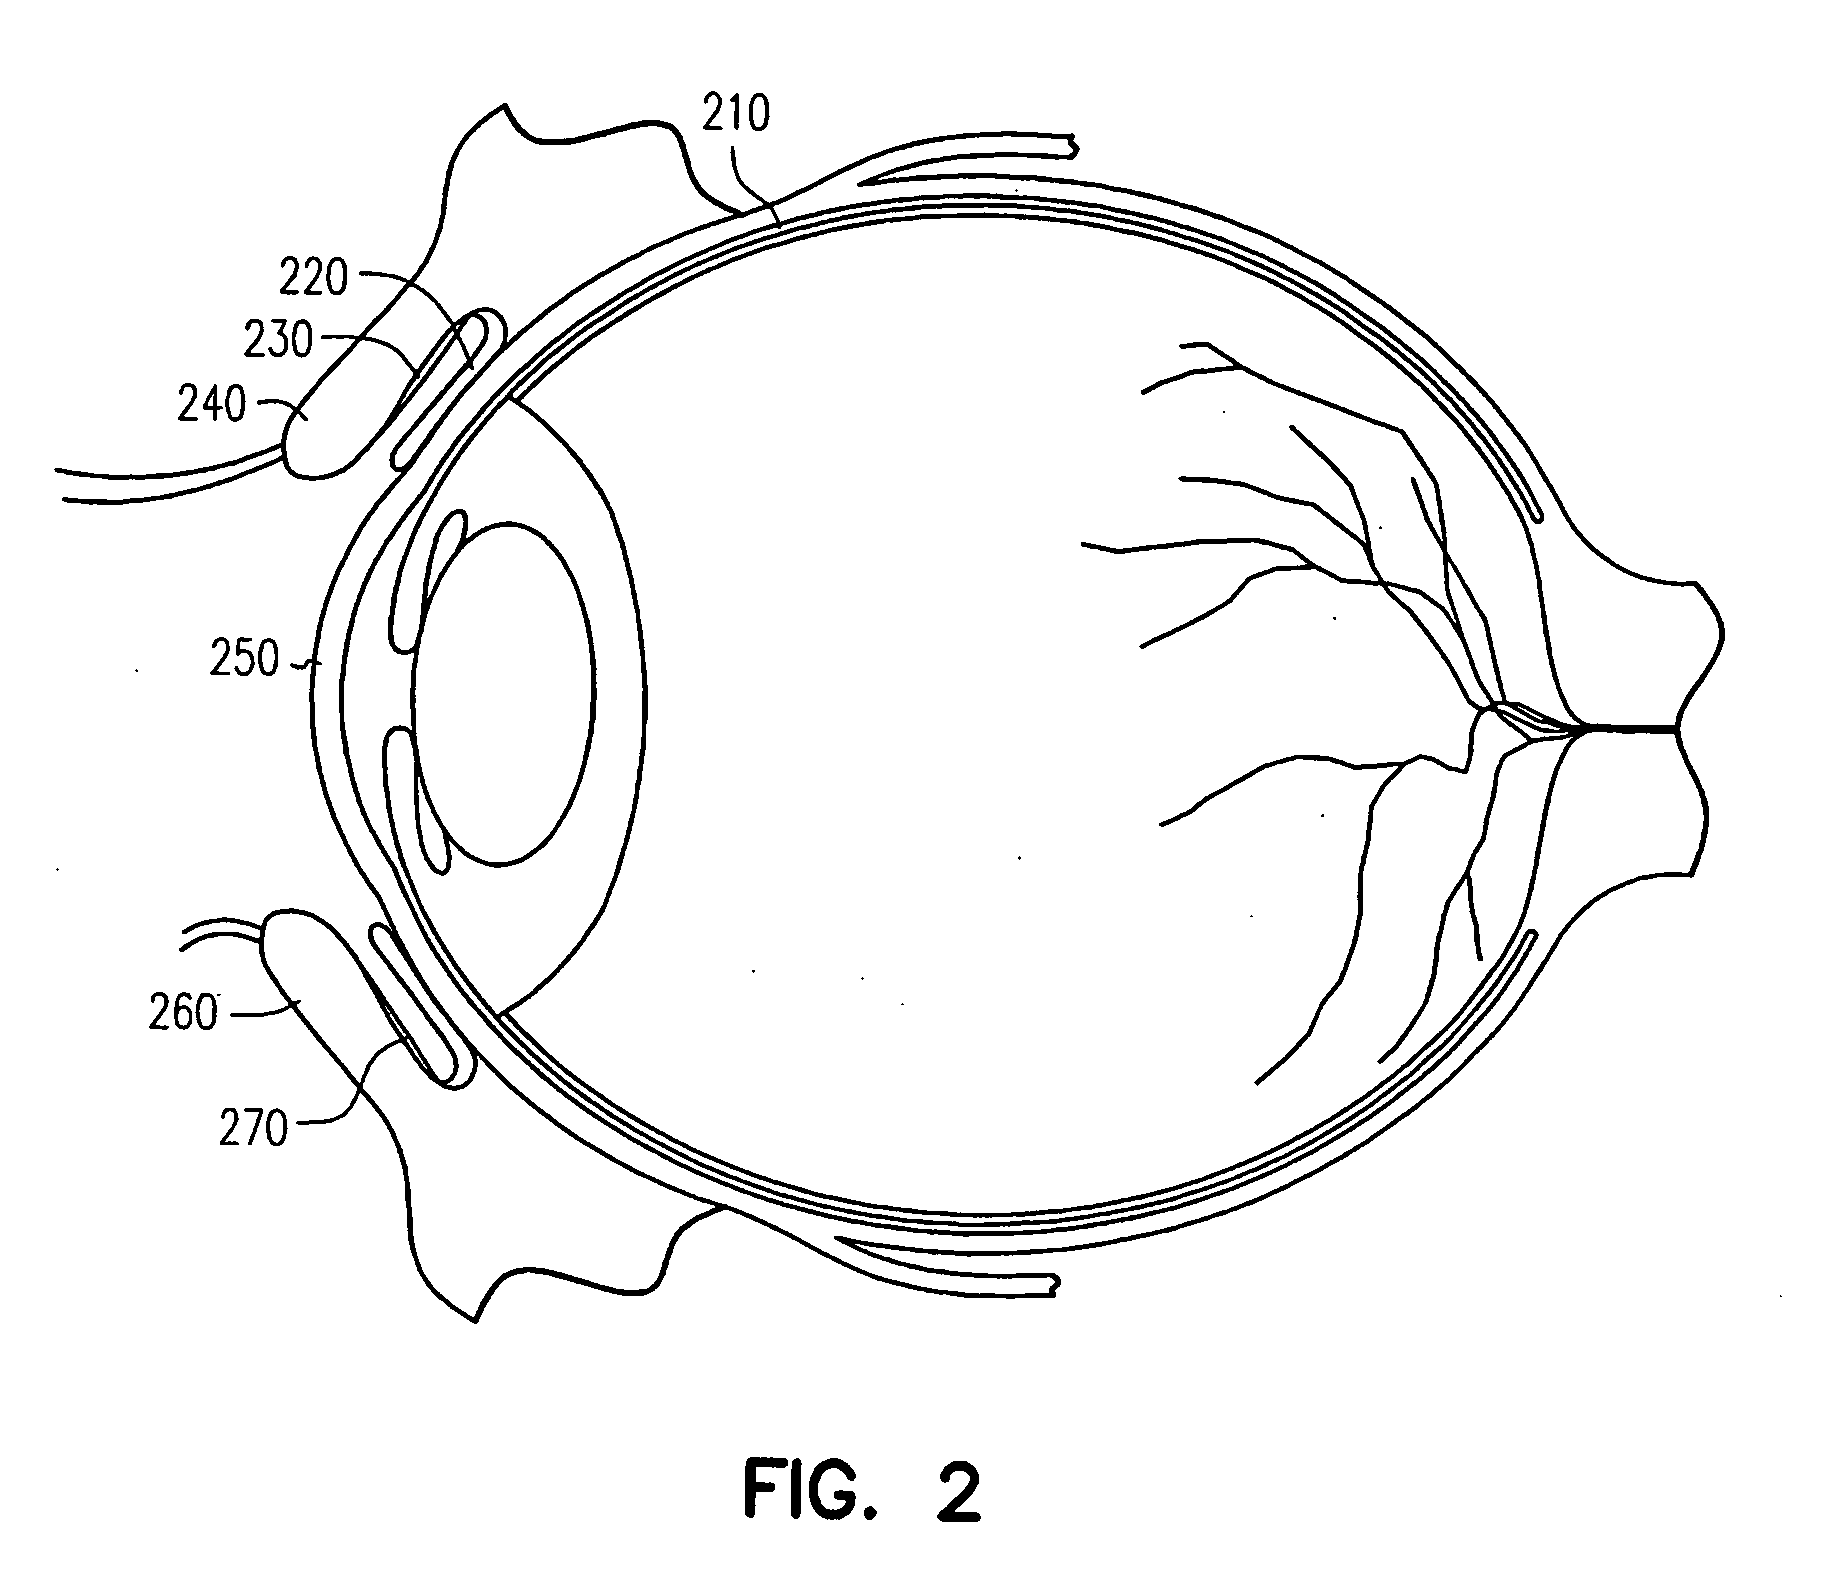 Adhesive bioerodible ocular drug delivery system